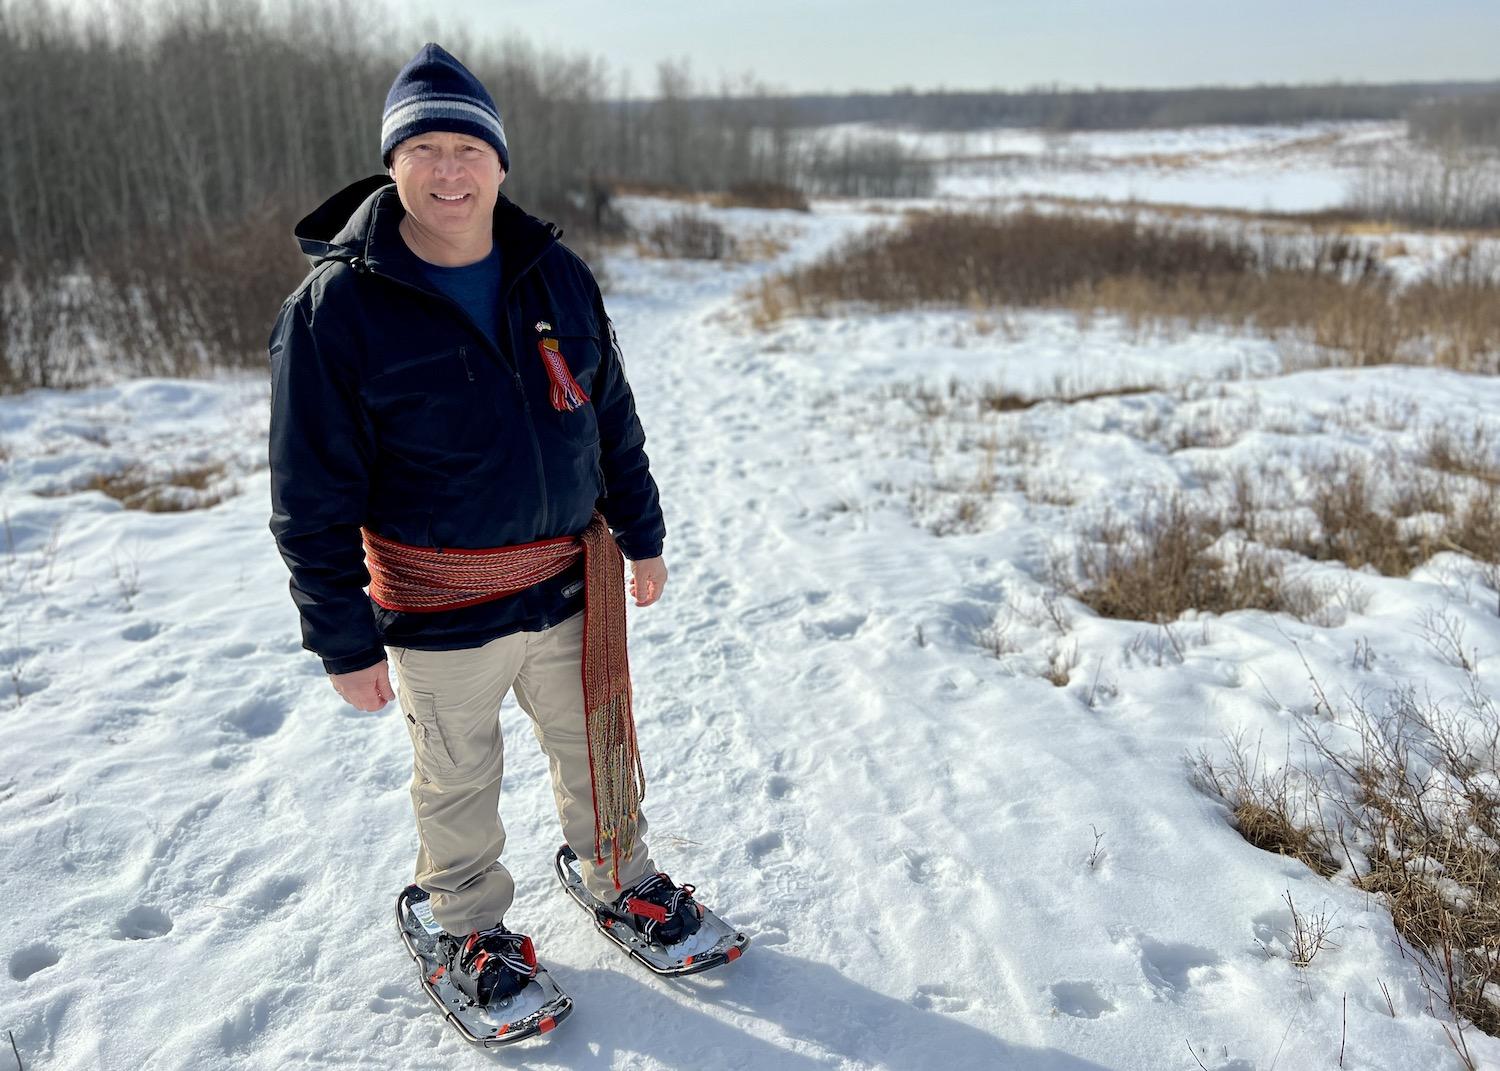 Keith Diakiw, a Métis geologist who founded Talking Rock Tours, leads a guided snowshoe trip through Elk Island National Park in Alberta wearing a Métis sash.